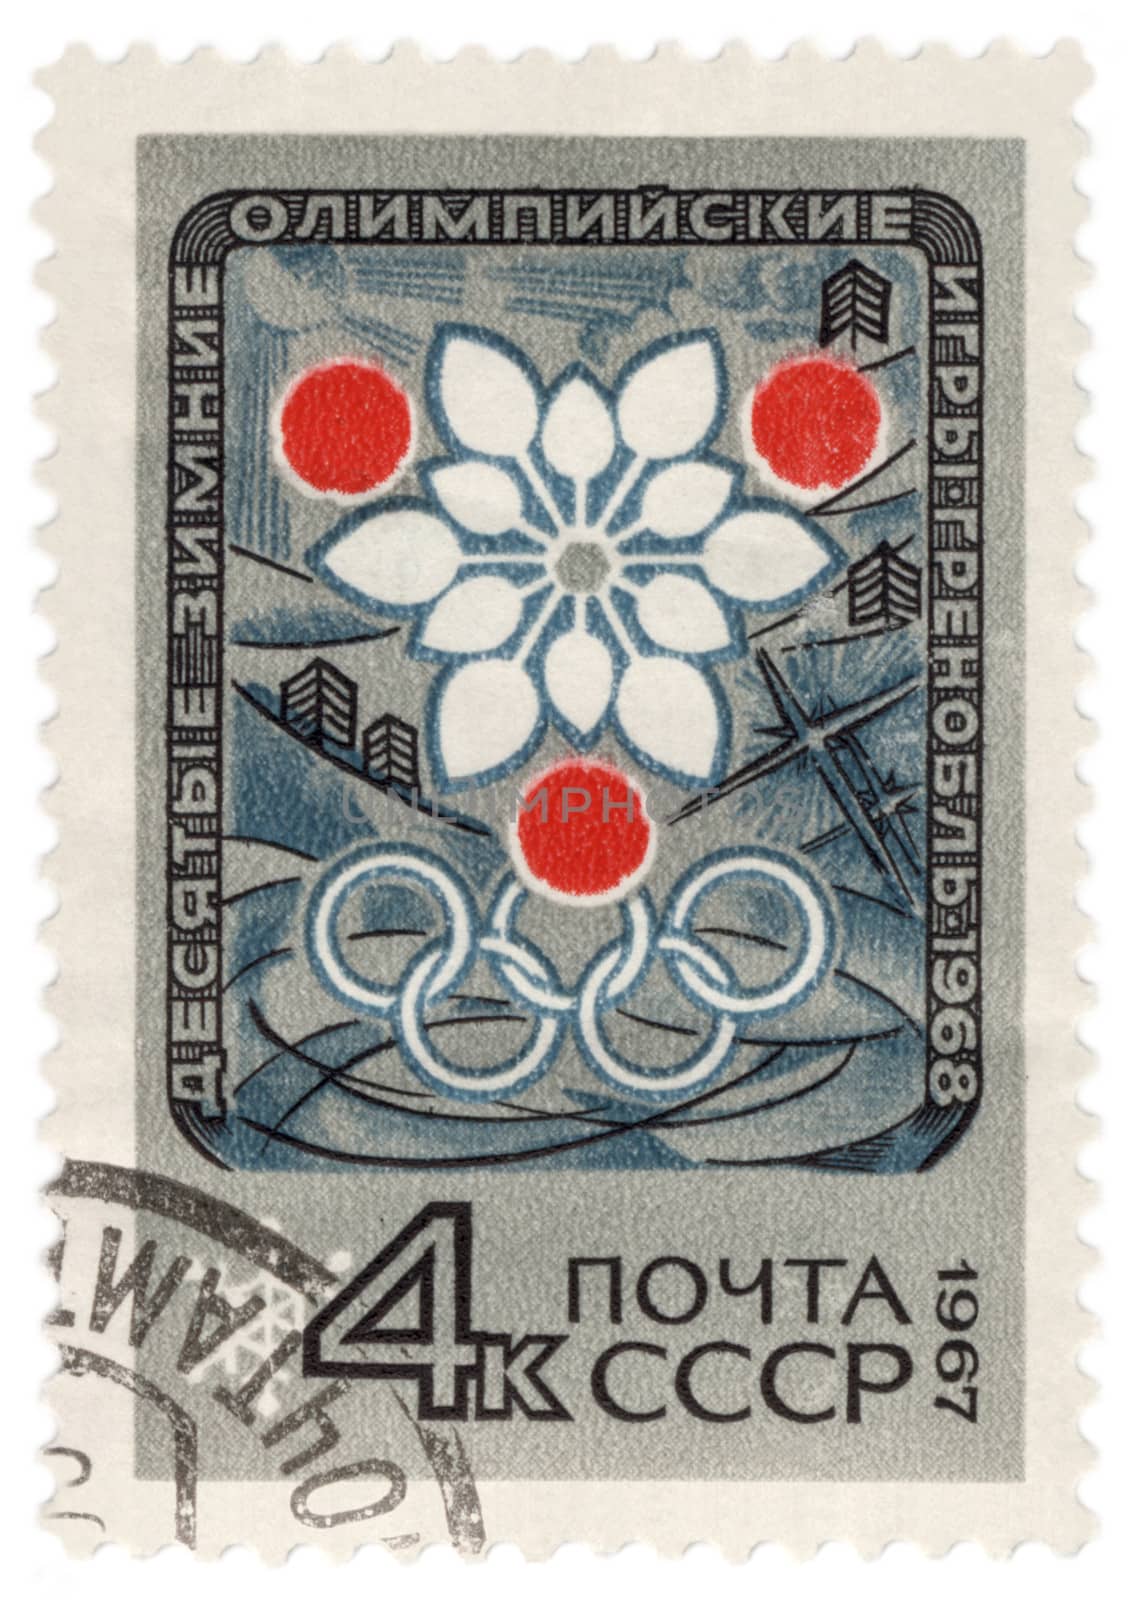 Symbolism of the Olympic Winter Games in Grenoble on post stamp by wander